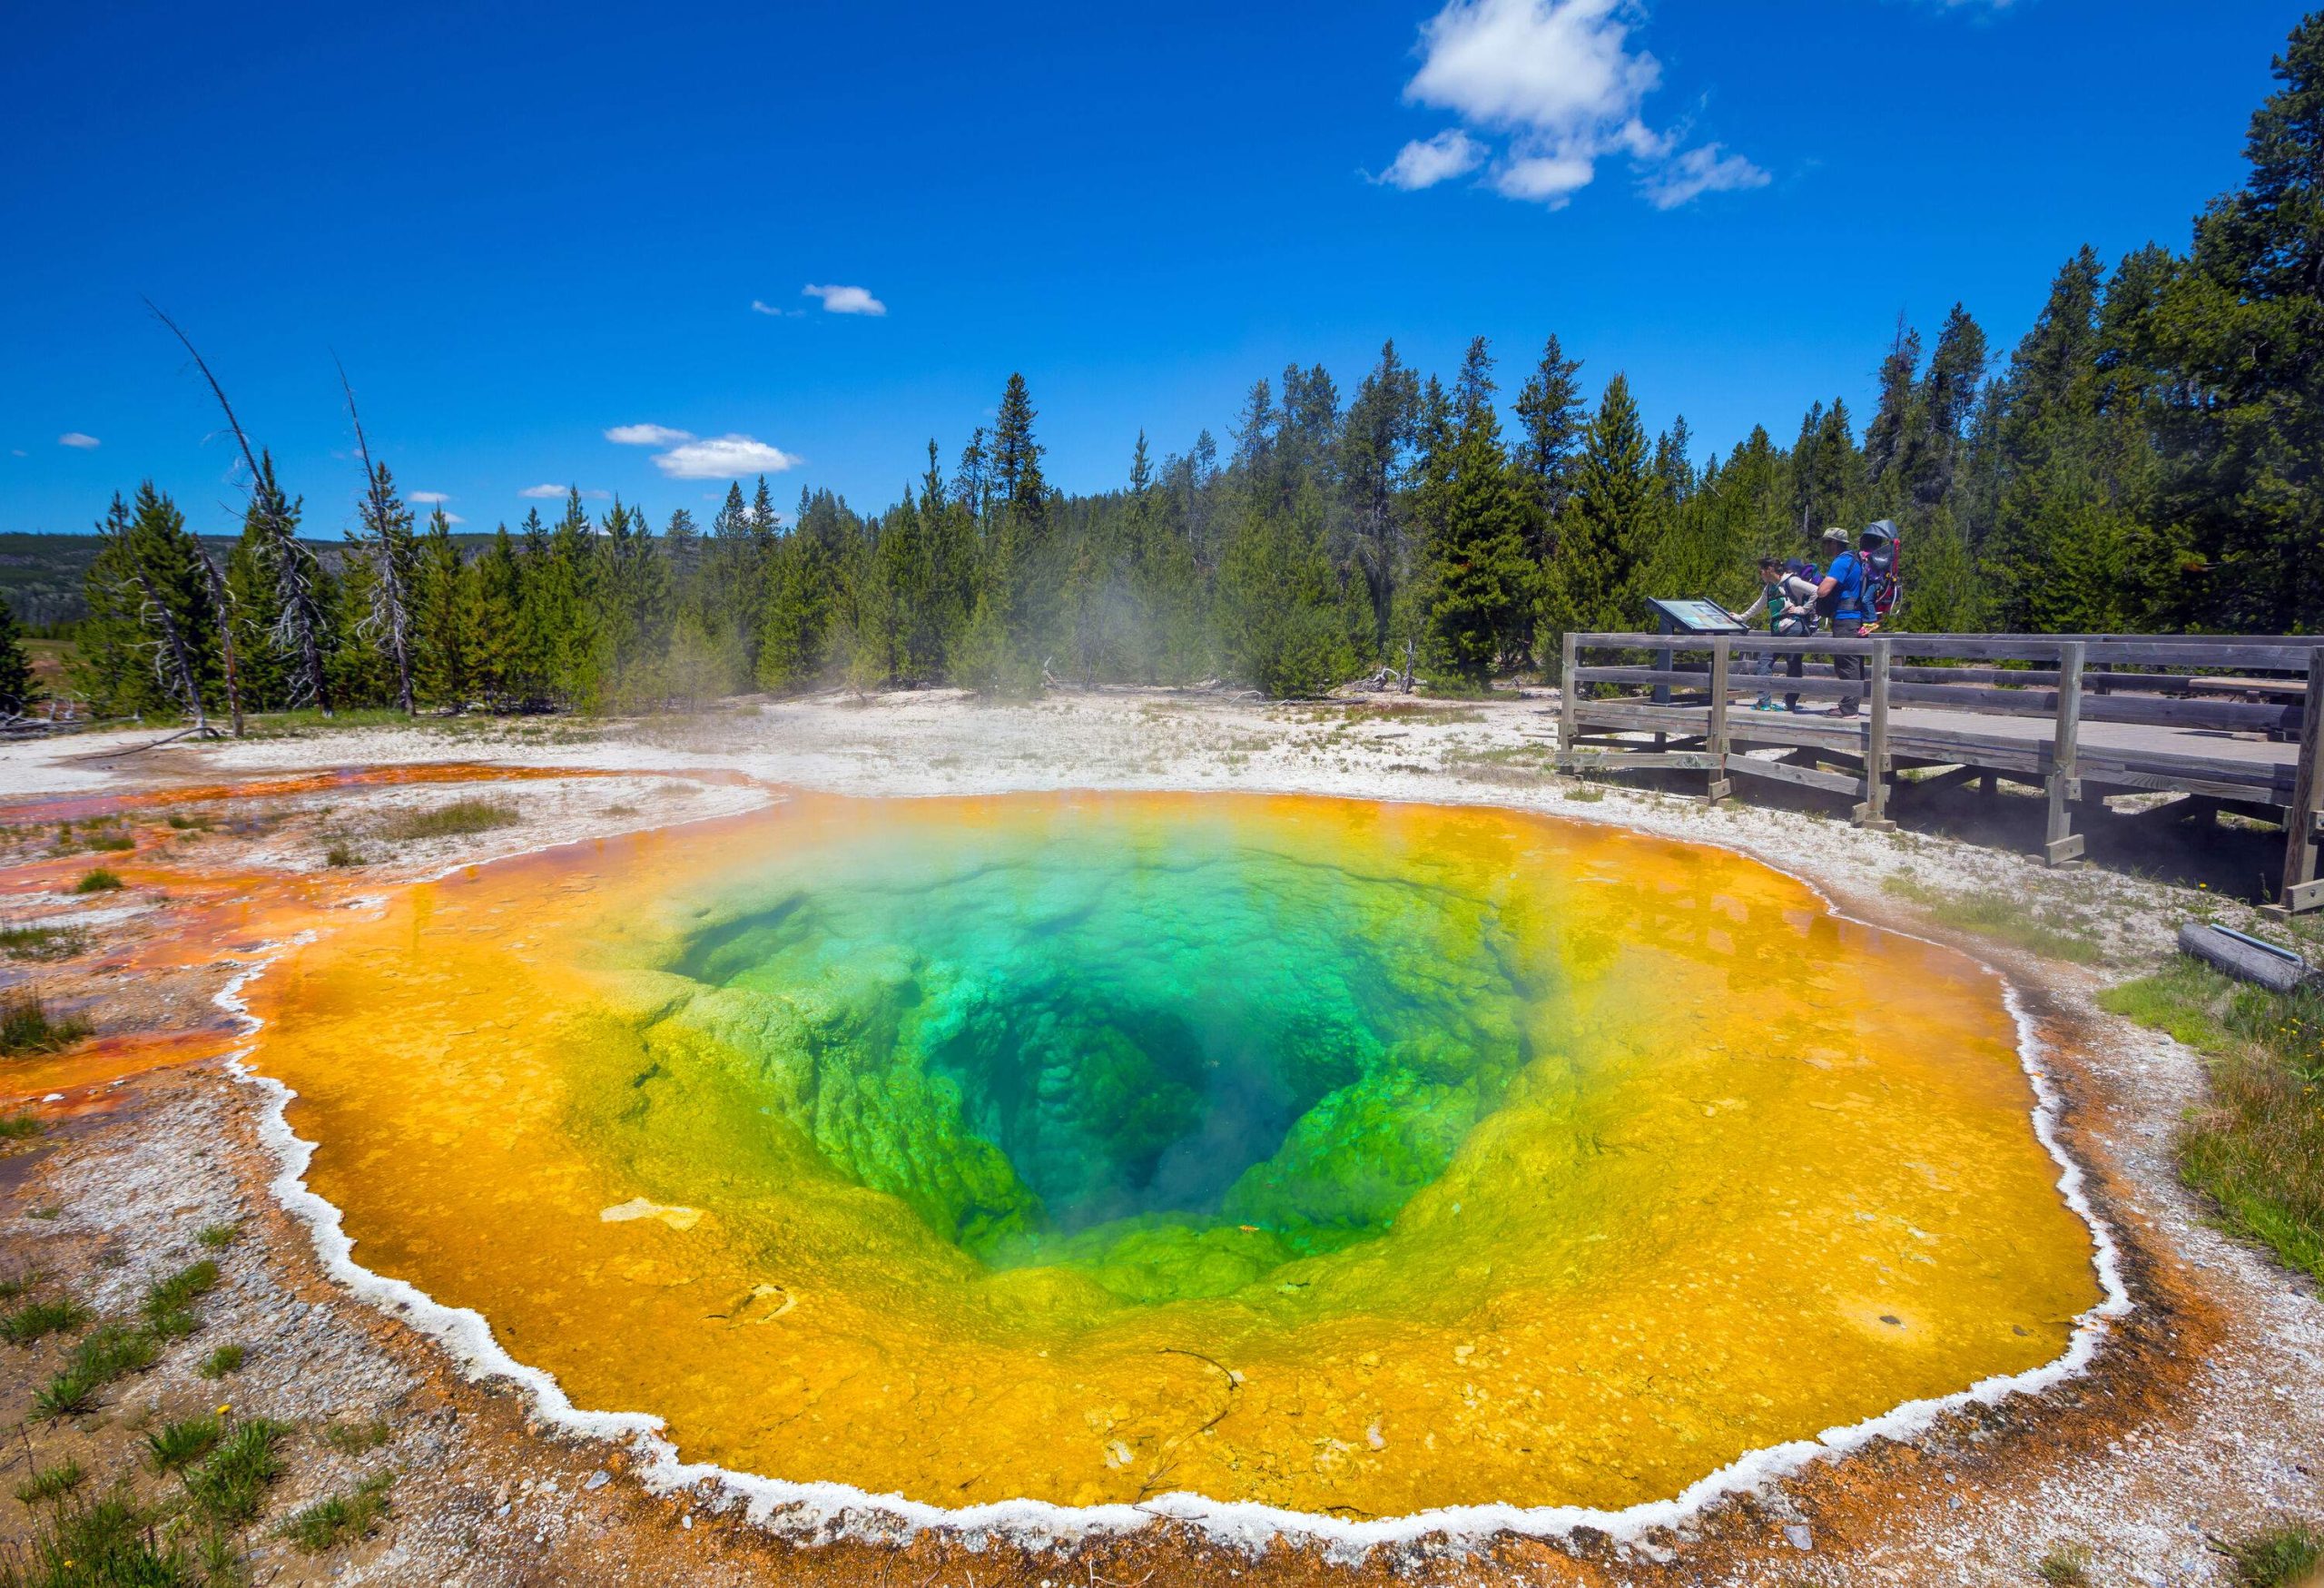 Two individuals are on a viewing deck looking at a hot spring with a distinct colour pool due to bacteria.